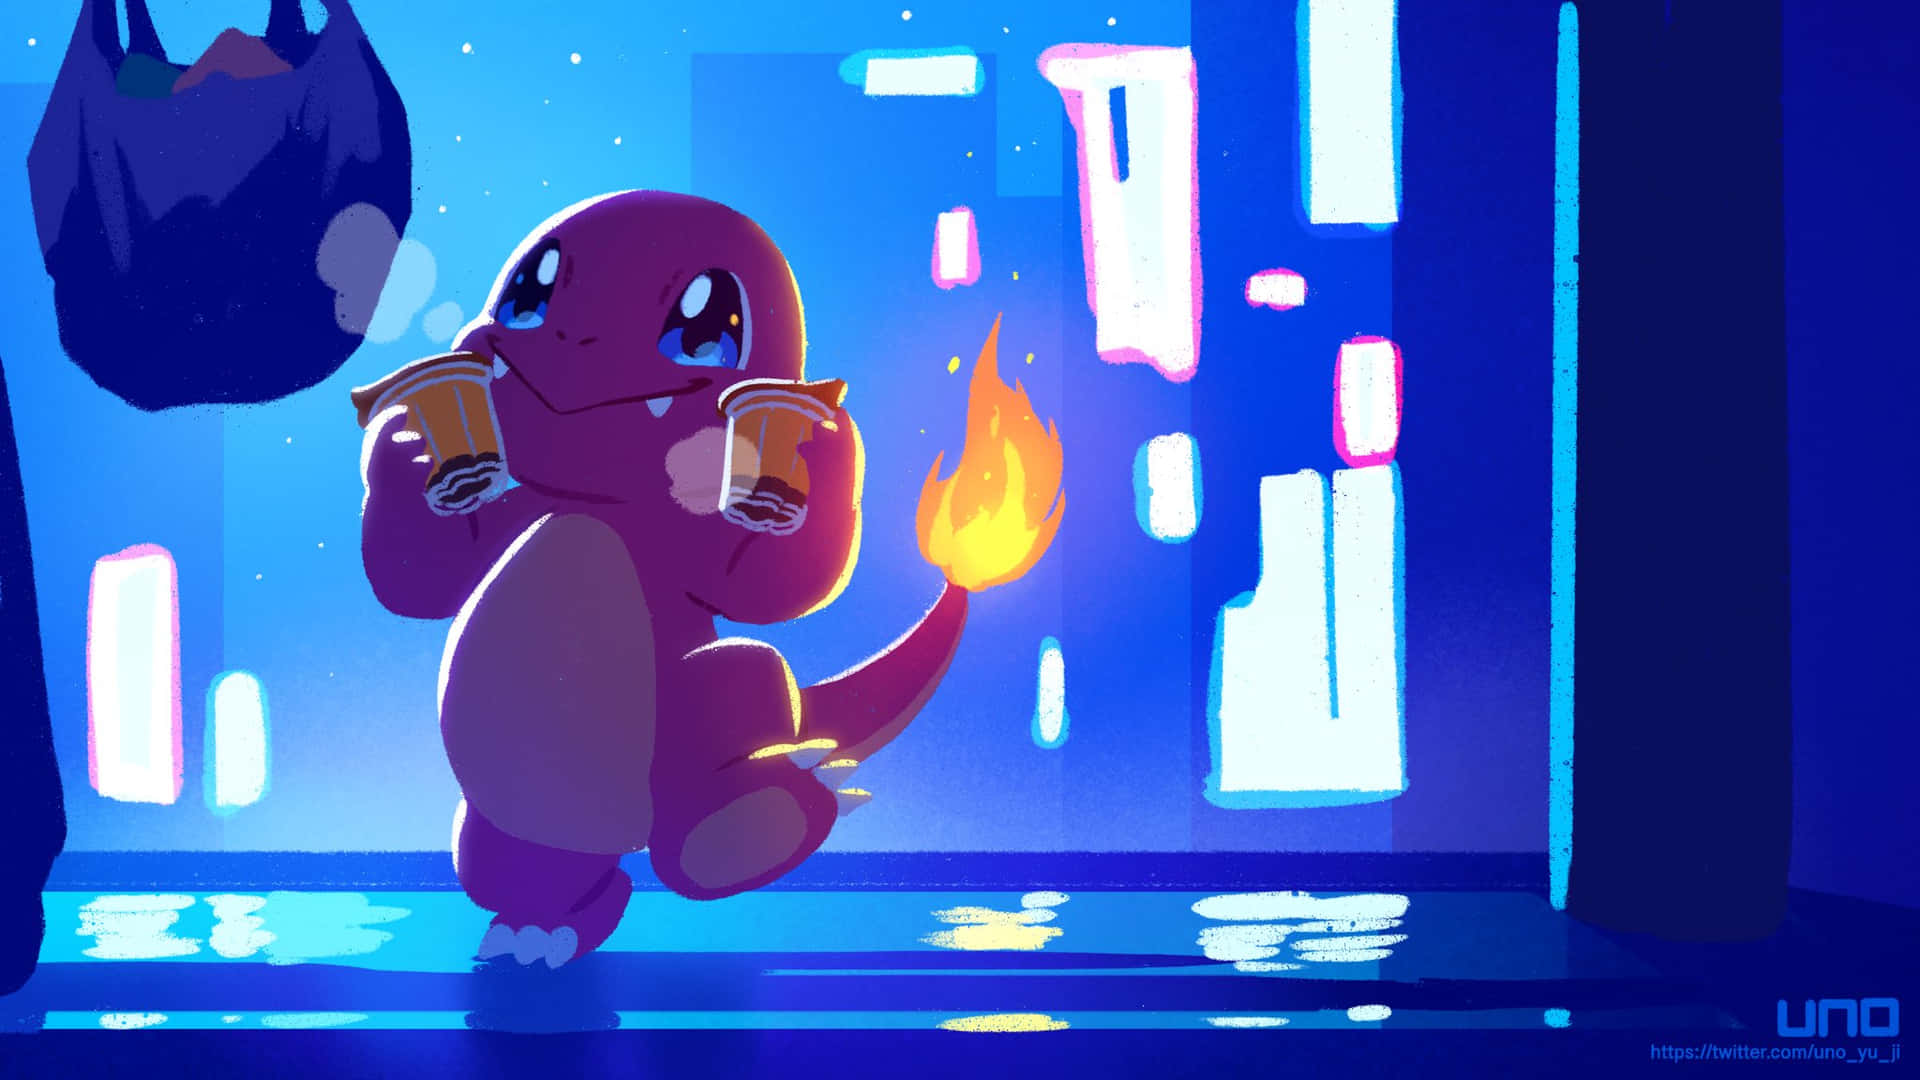 Start Your Journey with Cute Charmander Wallpaper